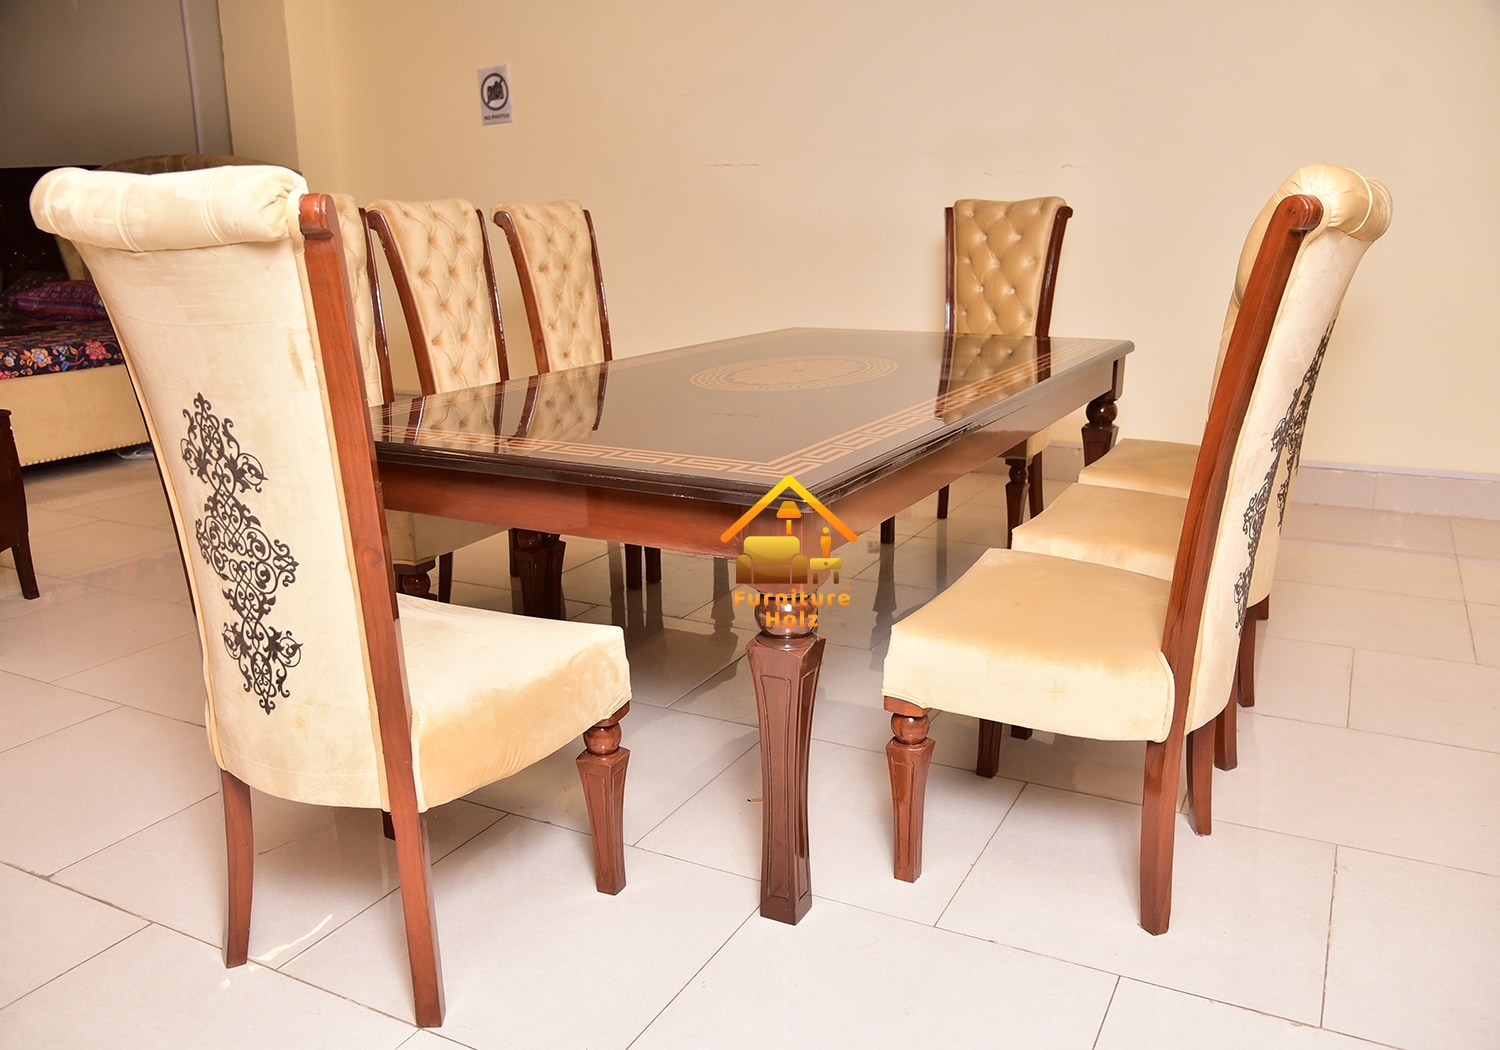 8 Chairs Shisham Wood Inlay Top Dining, Wooden Dining Table With 8 Chairs